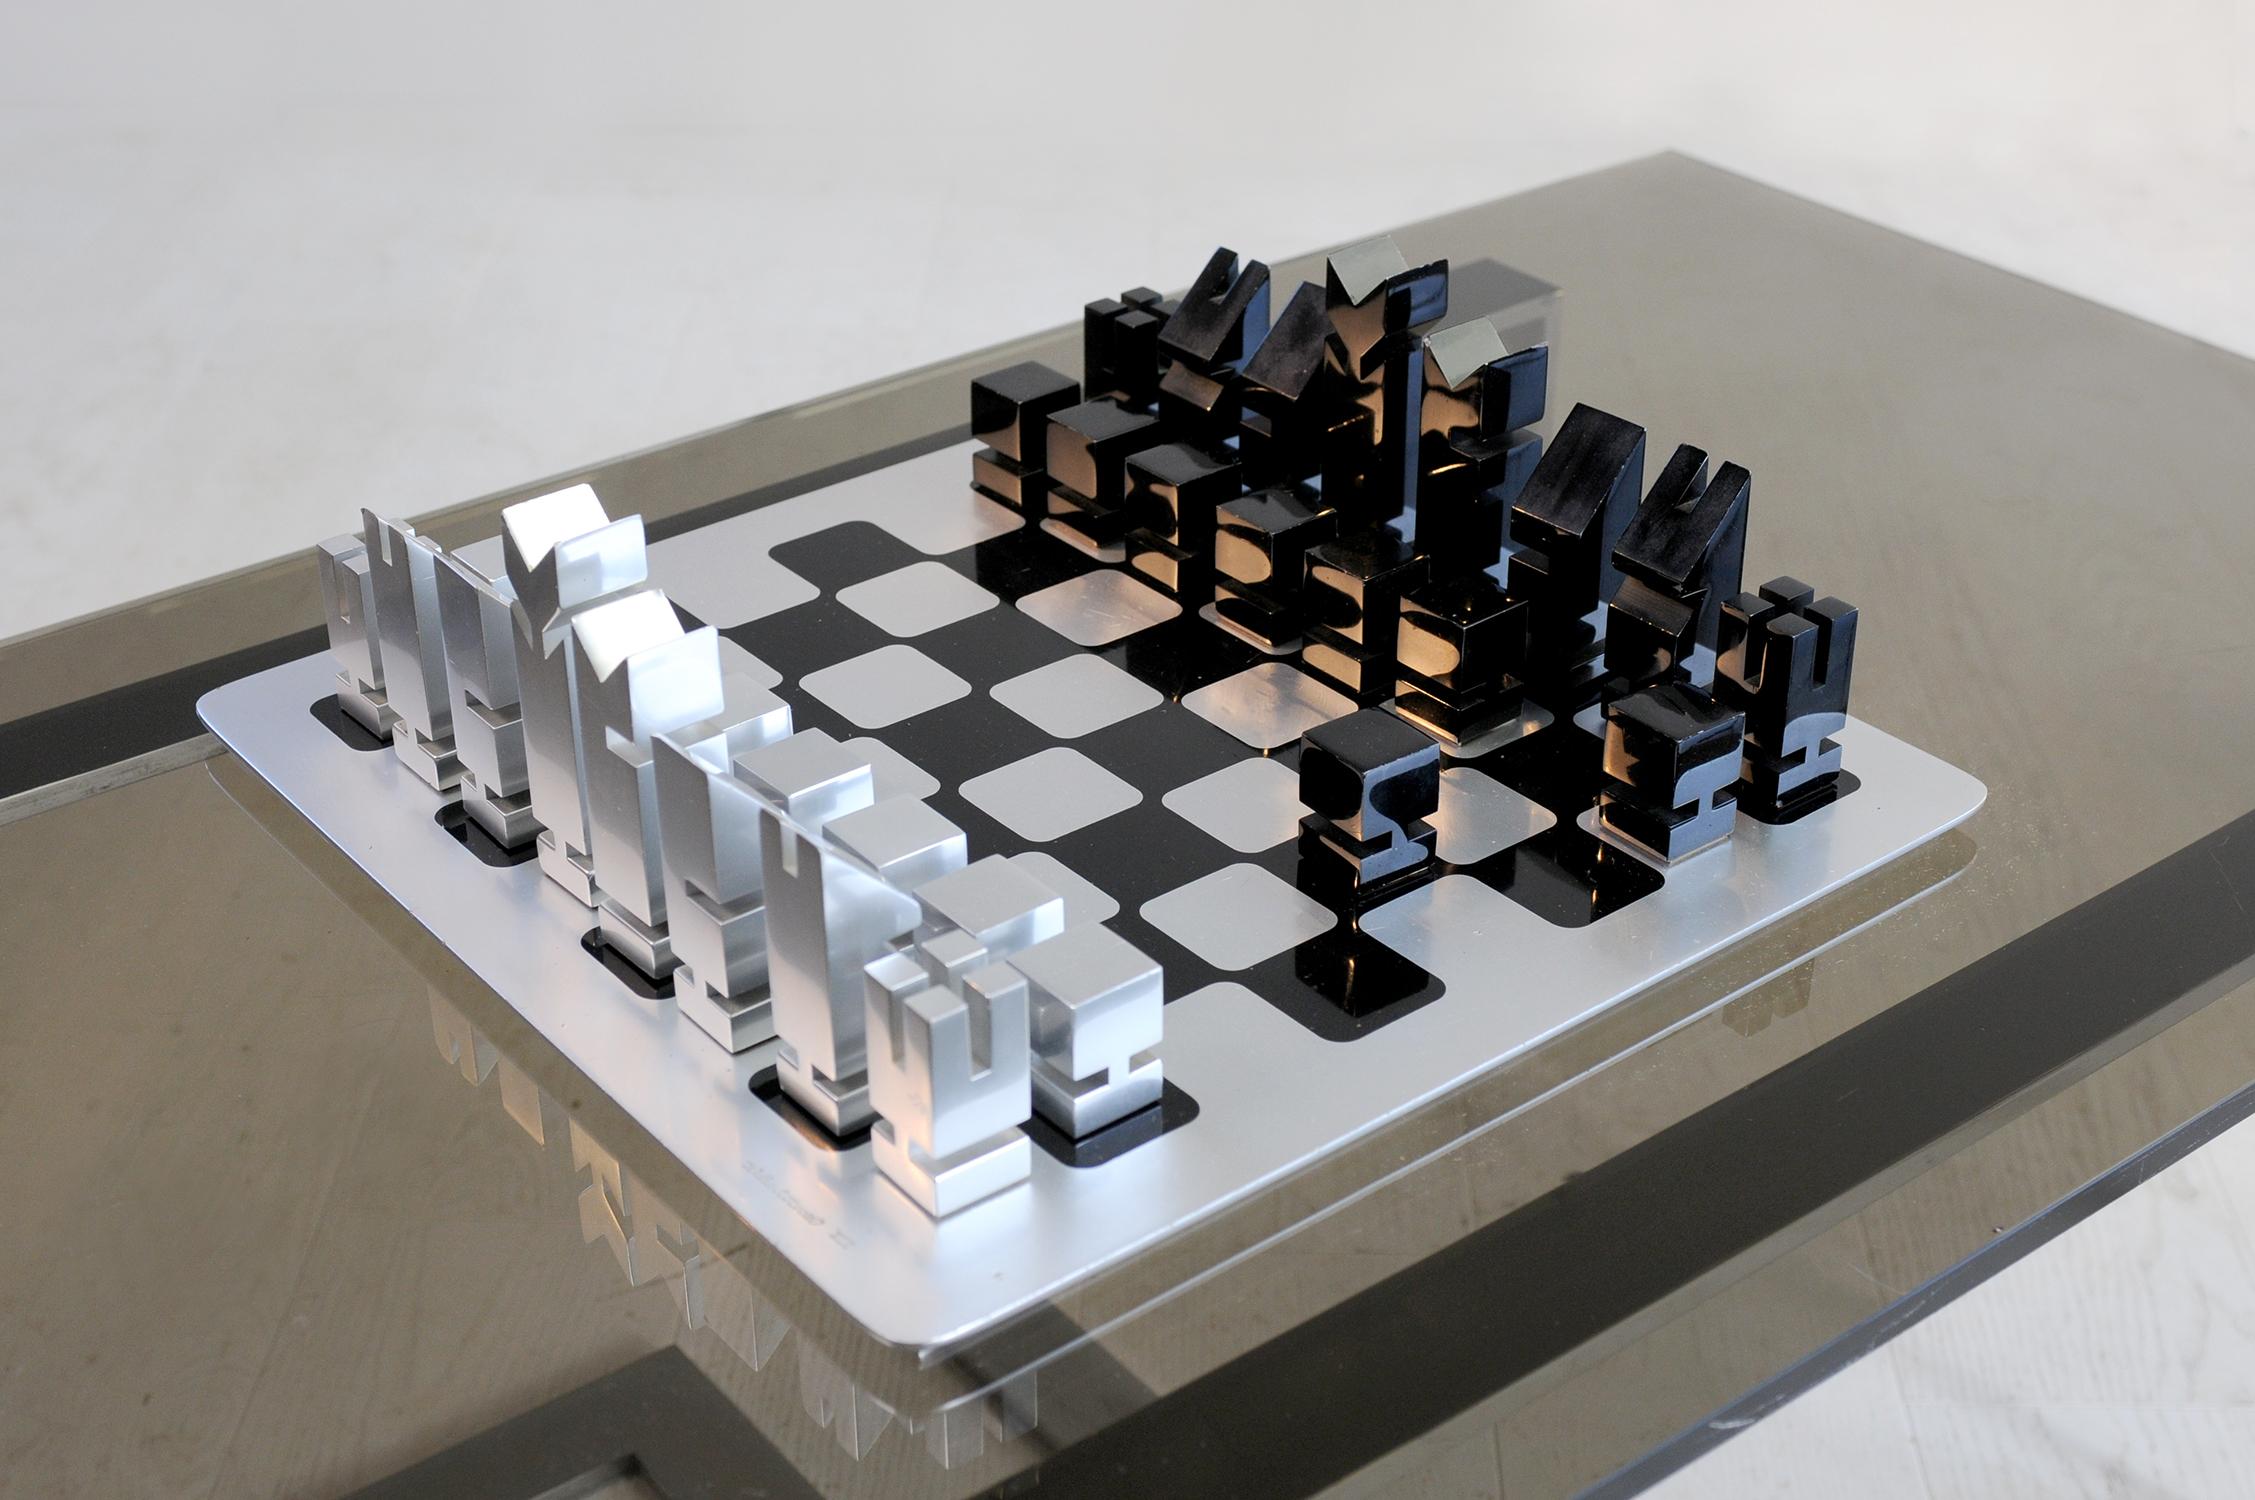 Late 20th Century Chess Set by Walter and Moretti, No. 1 of Pre-Production, France, 1970